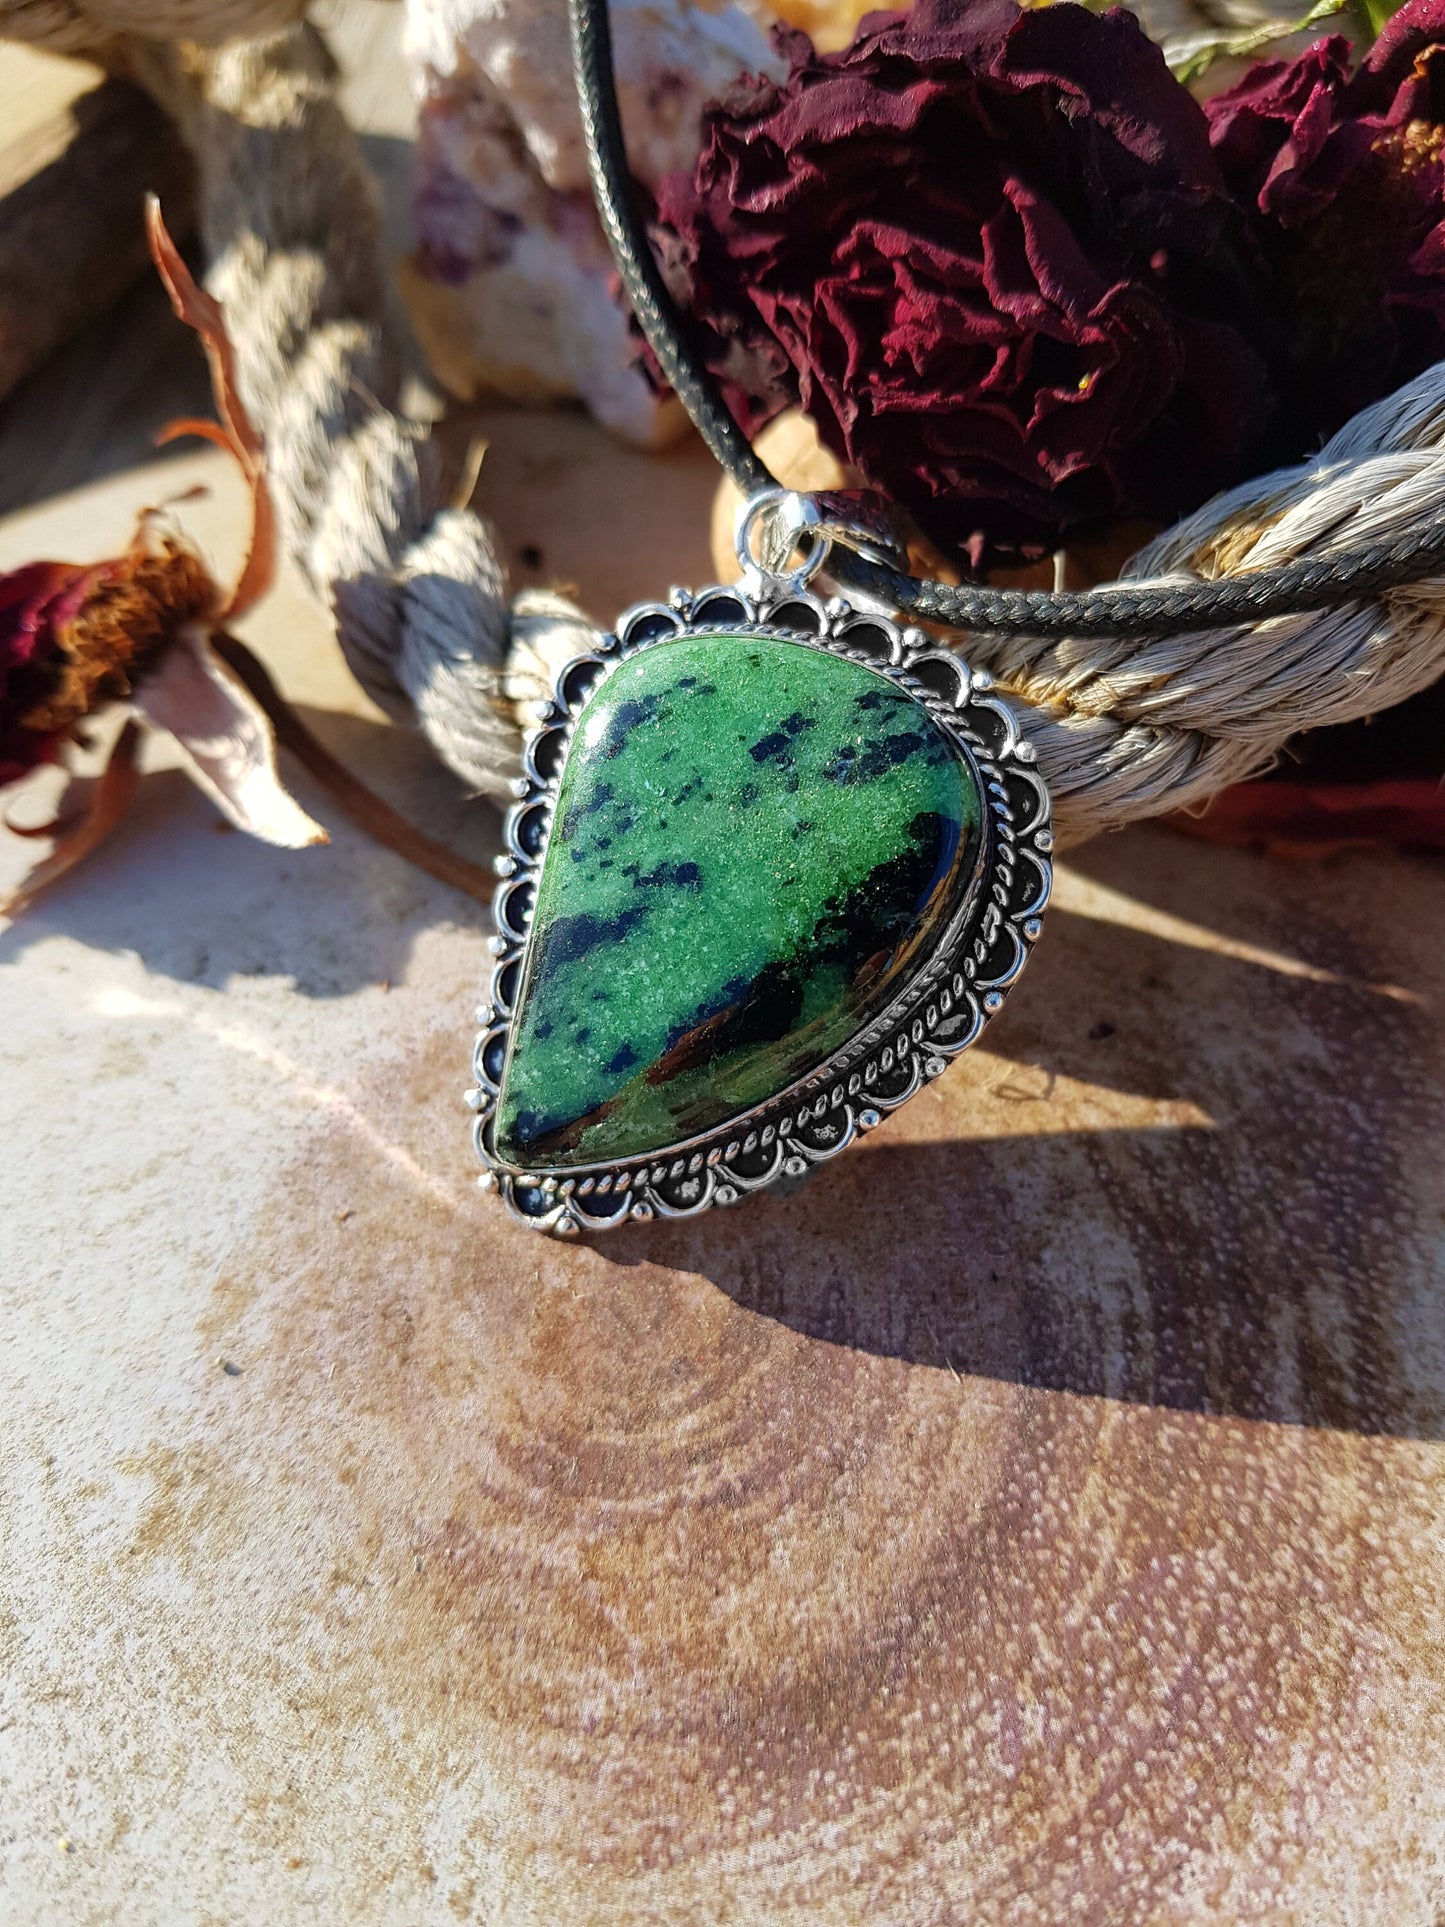 Ruby Zoisite Pendant In Sterling Silver Statement Necklace Boho Gemstone Pendant One Of A Kind Gift Gypsy Jewellery